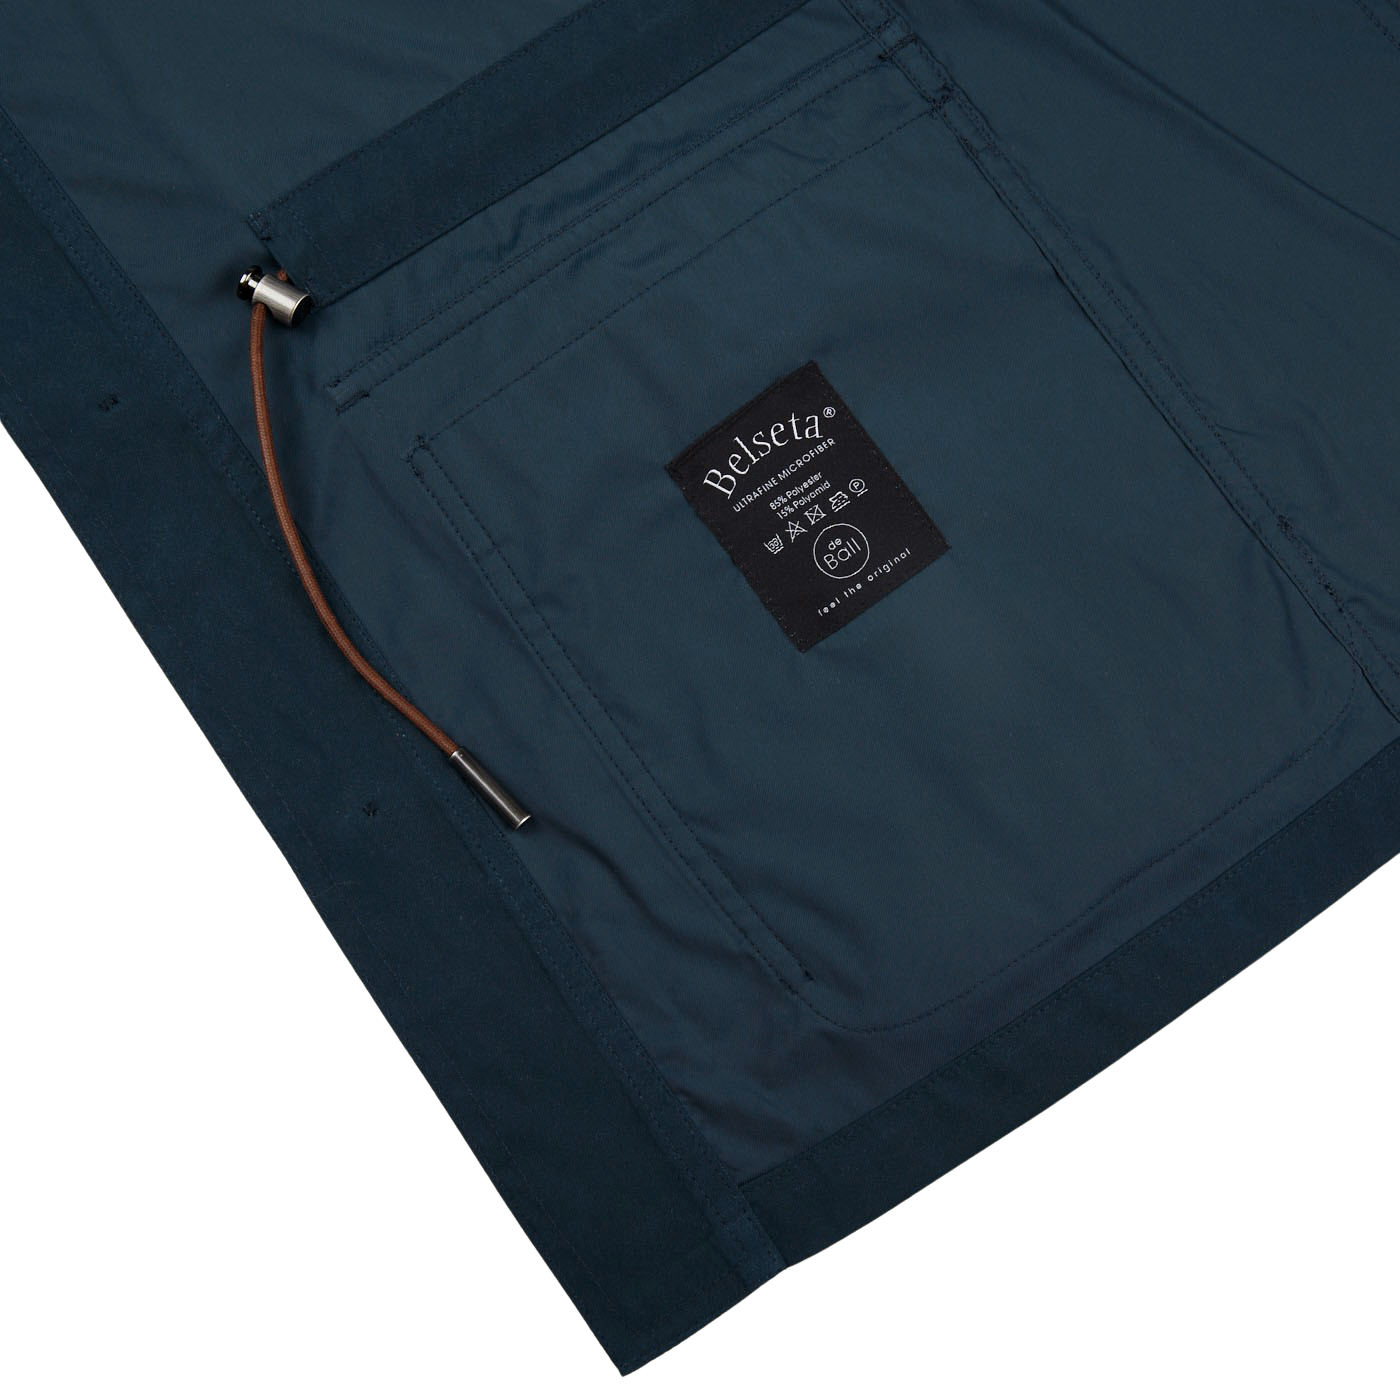 The water-resistant pocket of a Navy Blue Ultrafine Microfiber Safari Jacket by Manto with a logo on it.